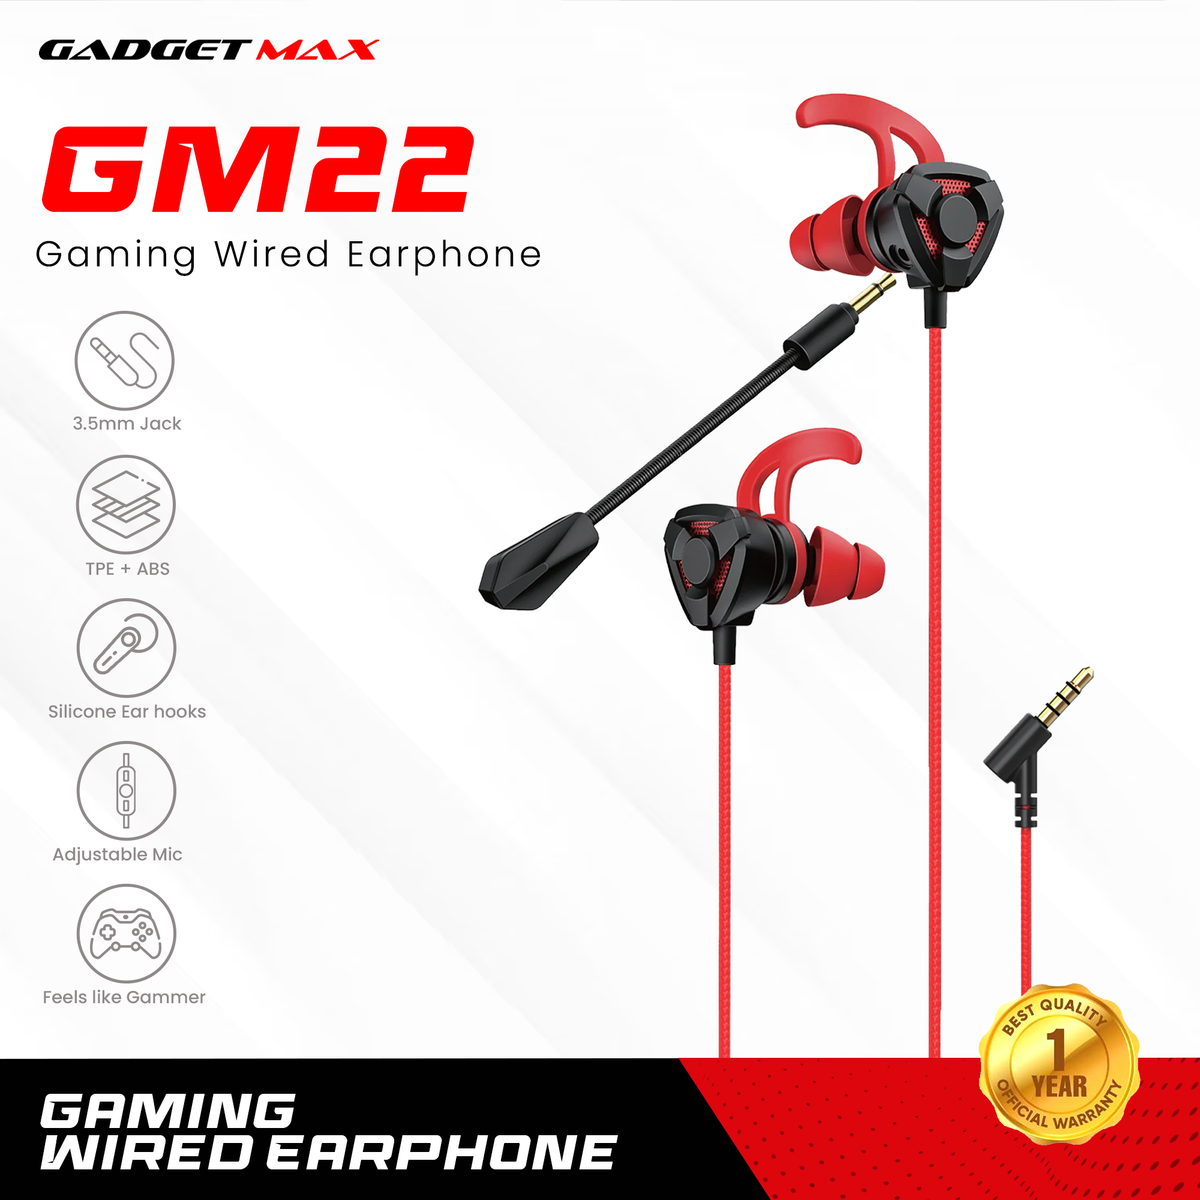 GADGET MAX GM22 3.5MM GAMING WIRED EARPHONE WITH MIC (1.2M) - BLACK & RED